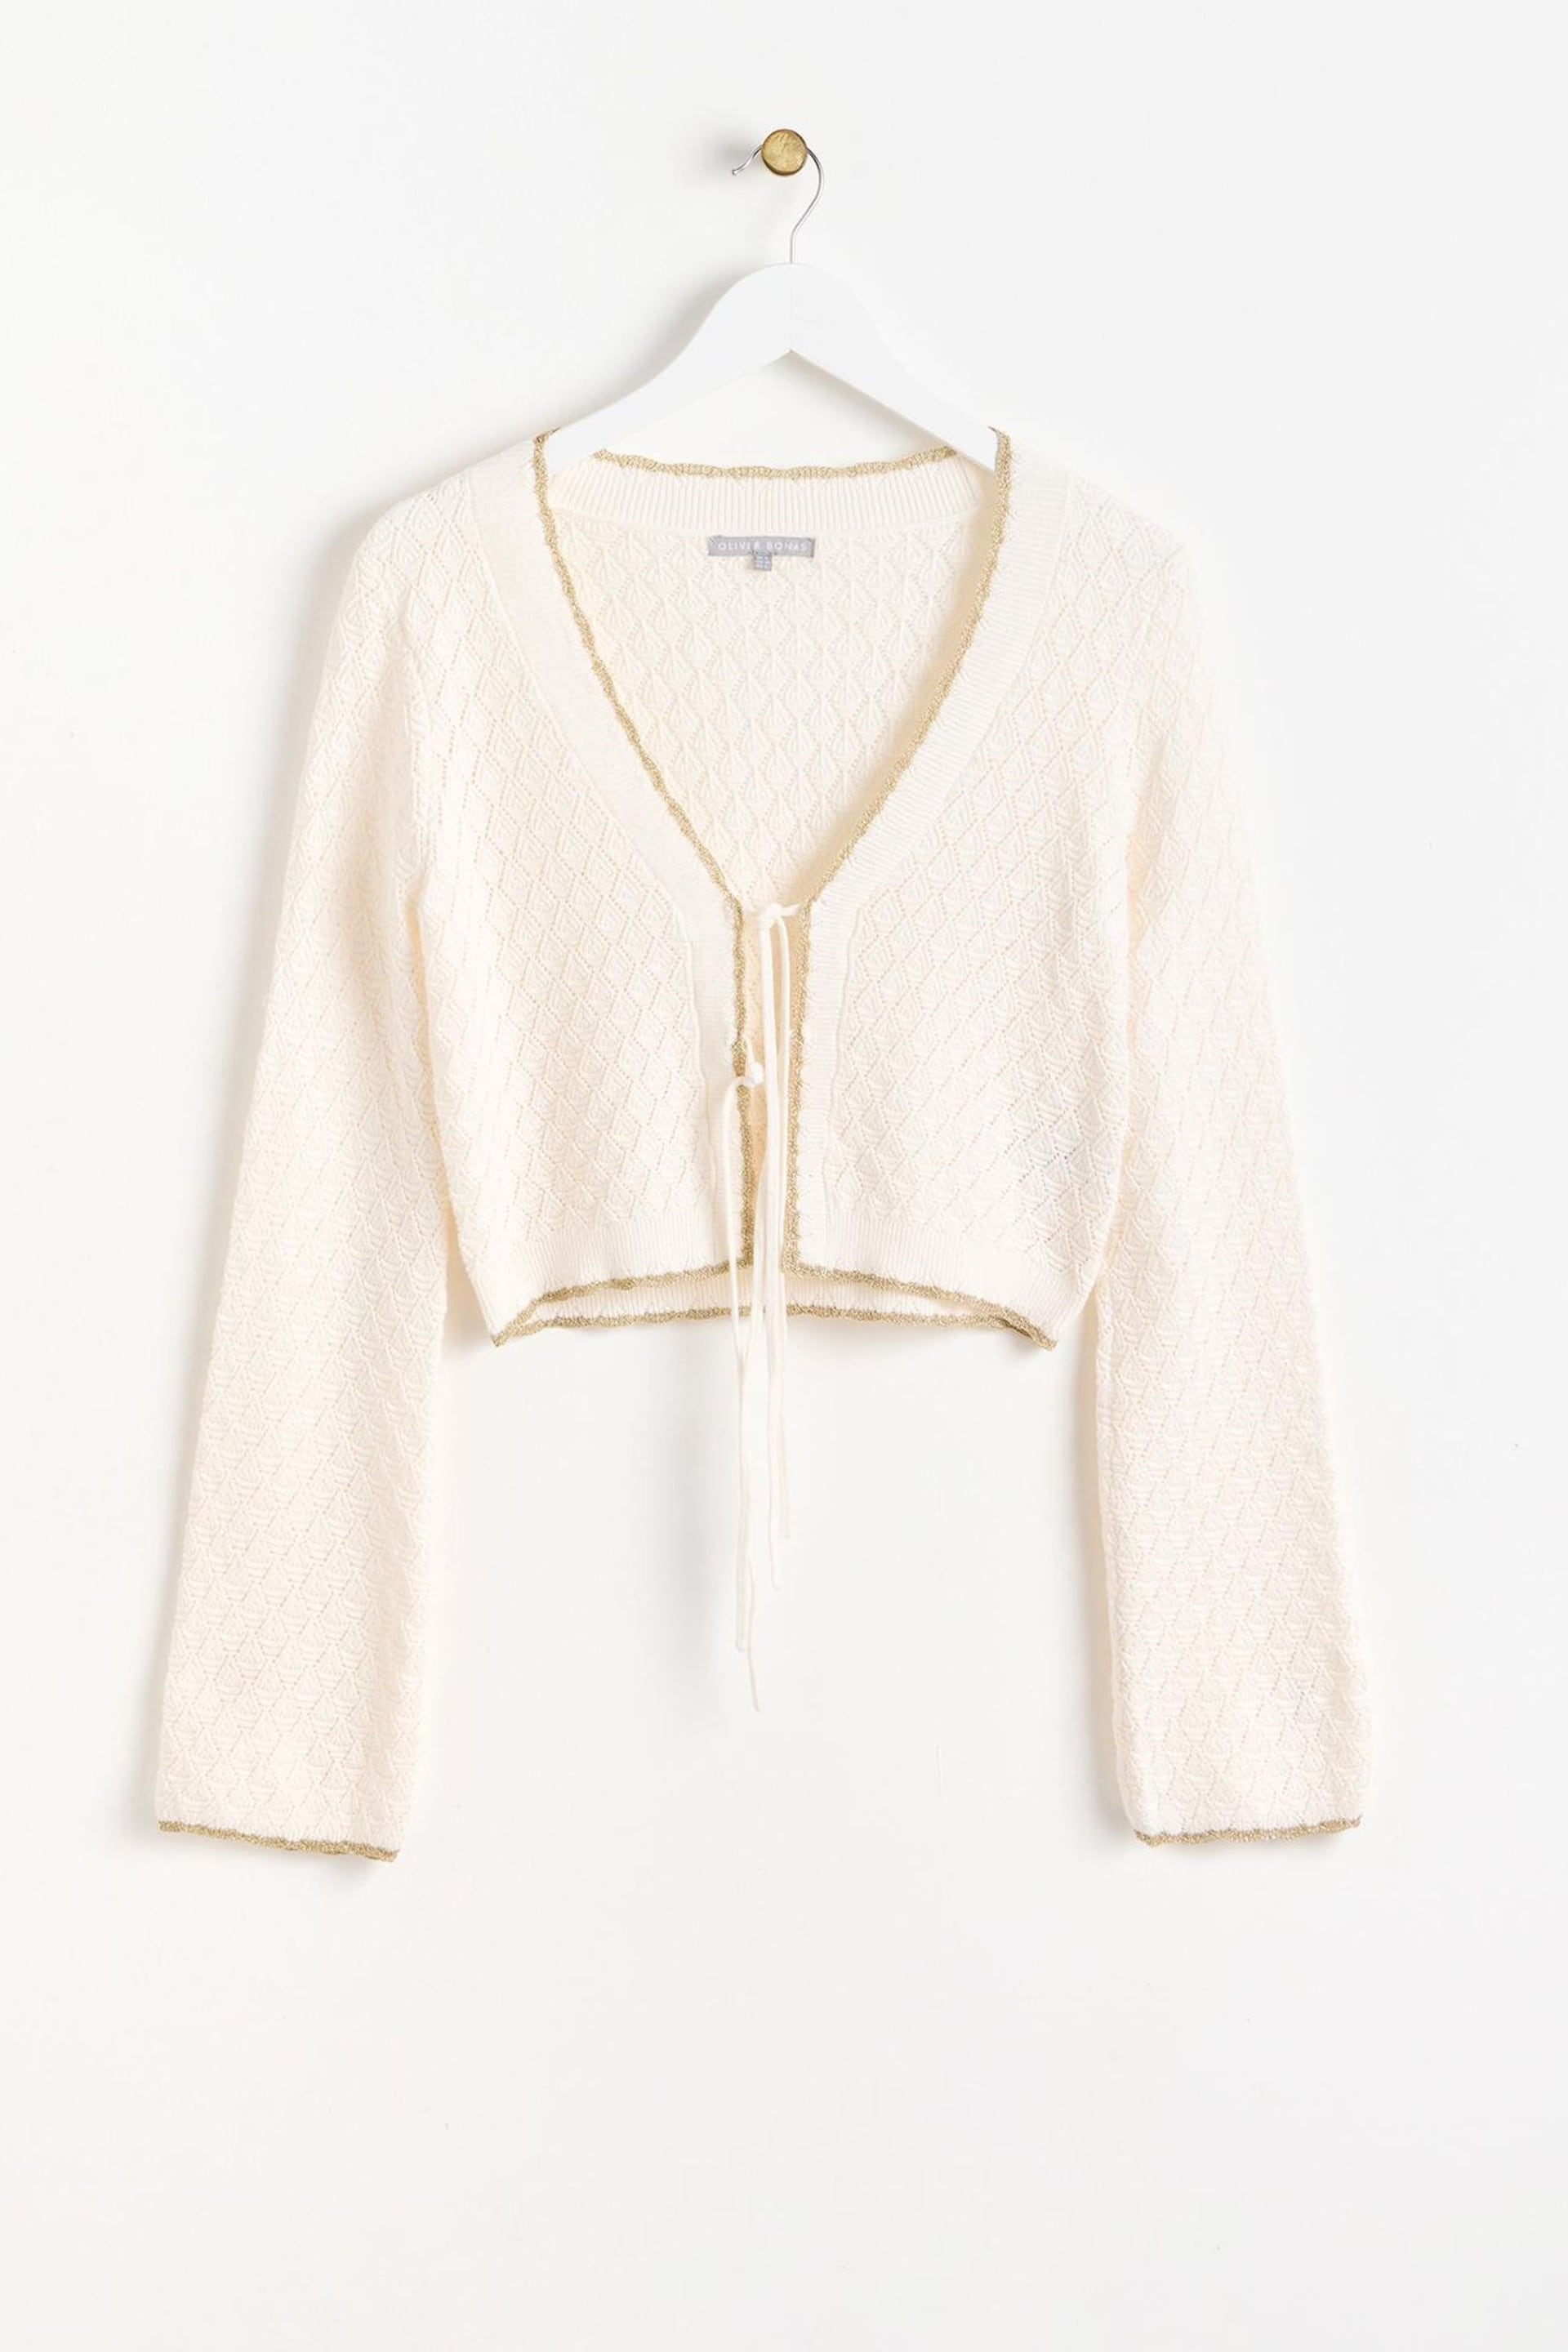 Oliver Bonas White Sparkle Knitted Tie Cardigan - Image 4 of 9